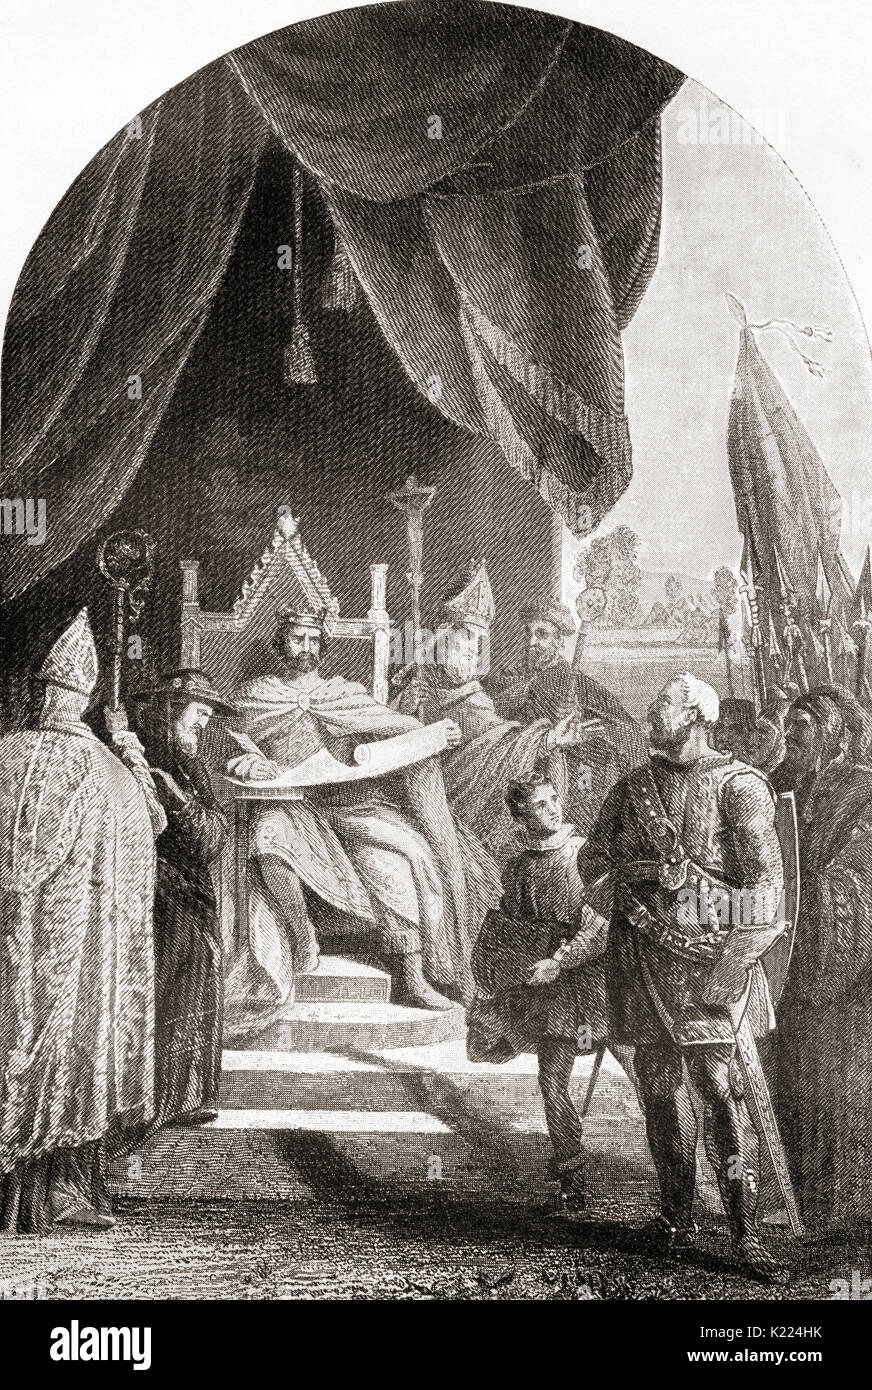 The signing of the Magna Carta Libertatum commonly called Magna Carta or Magna Charta by King John of England at Runnymede, near Windsor, on 15 June 1215.  John, 1166 –  1216, aka John Lackland, King of England.  From International Library of Famous Literature, published c.1900 Stock Photo